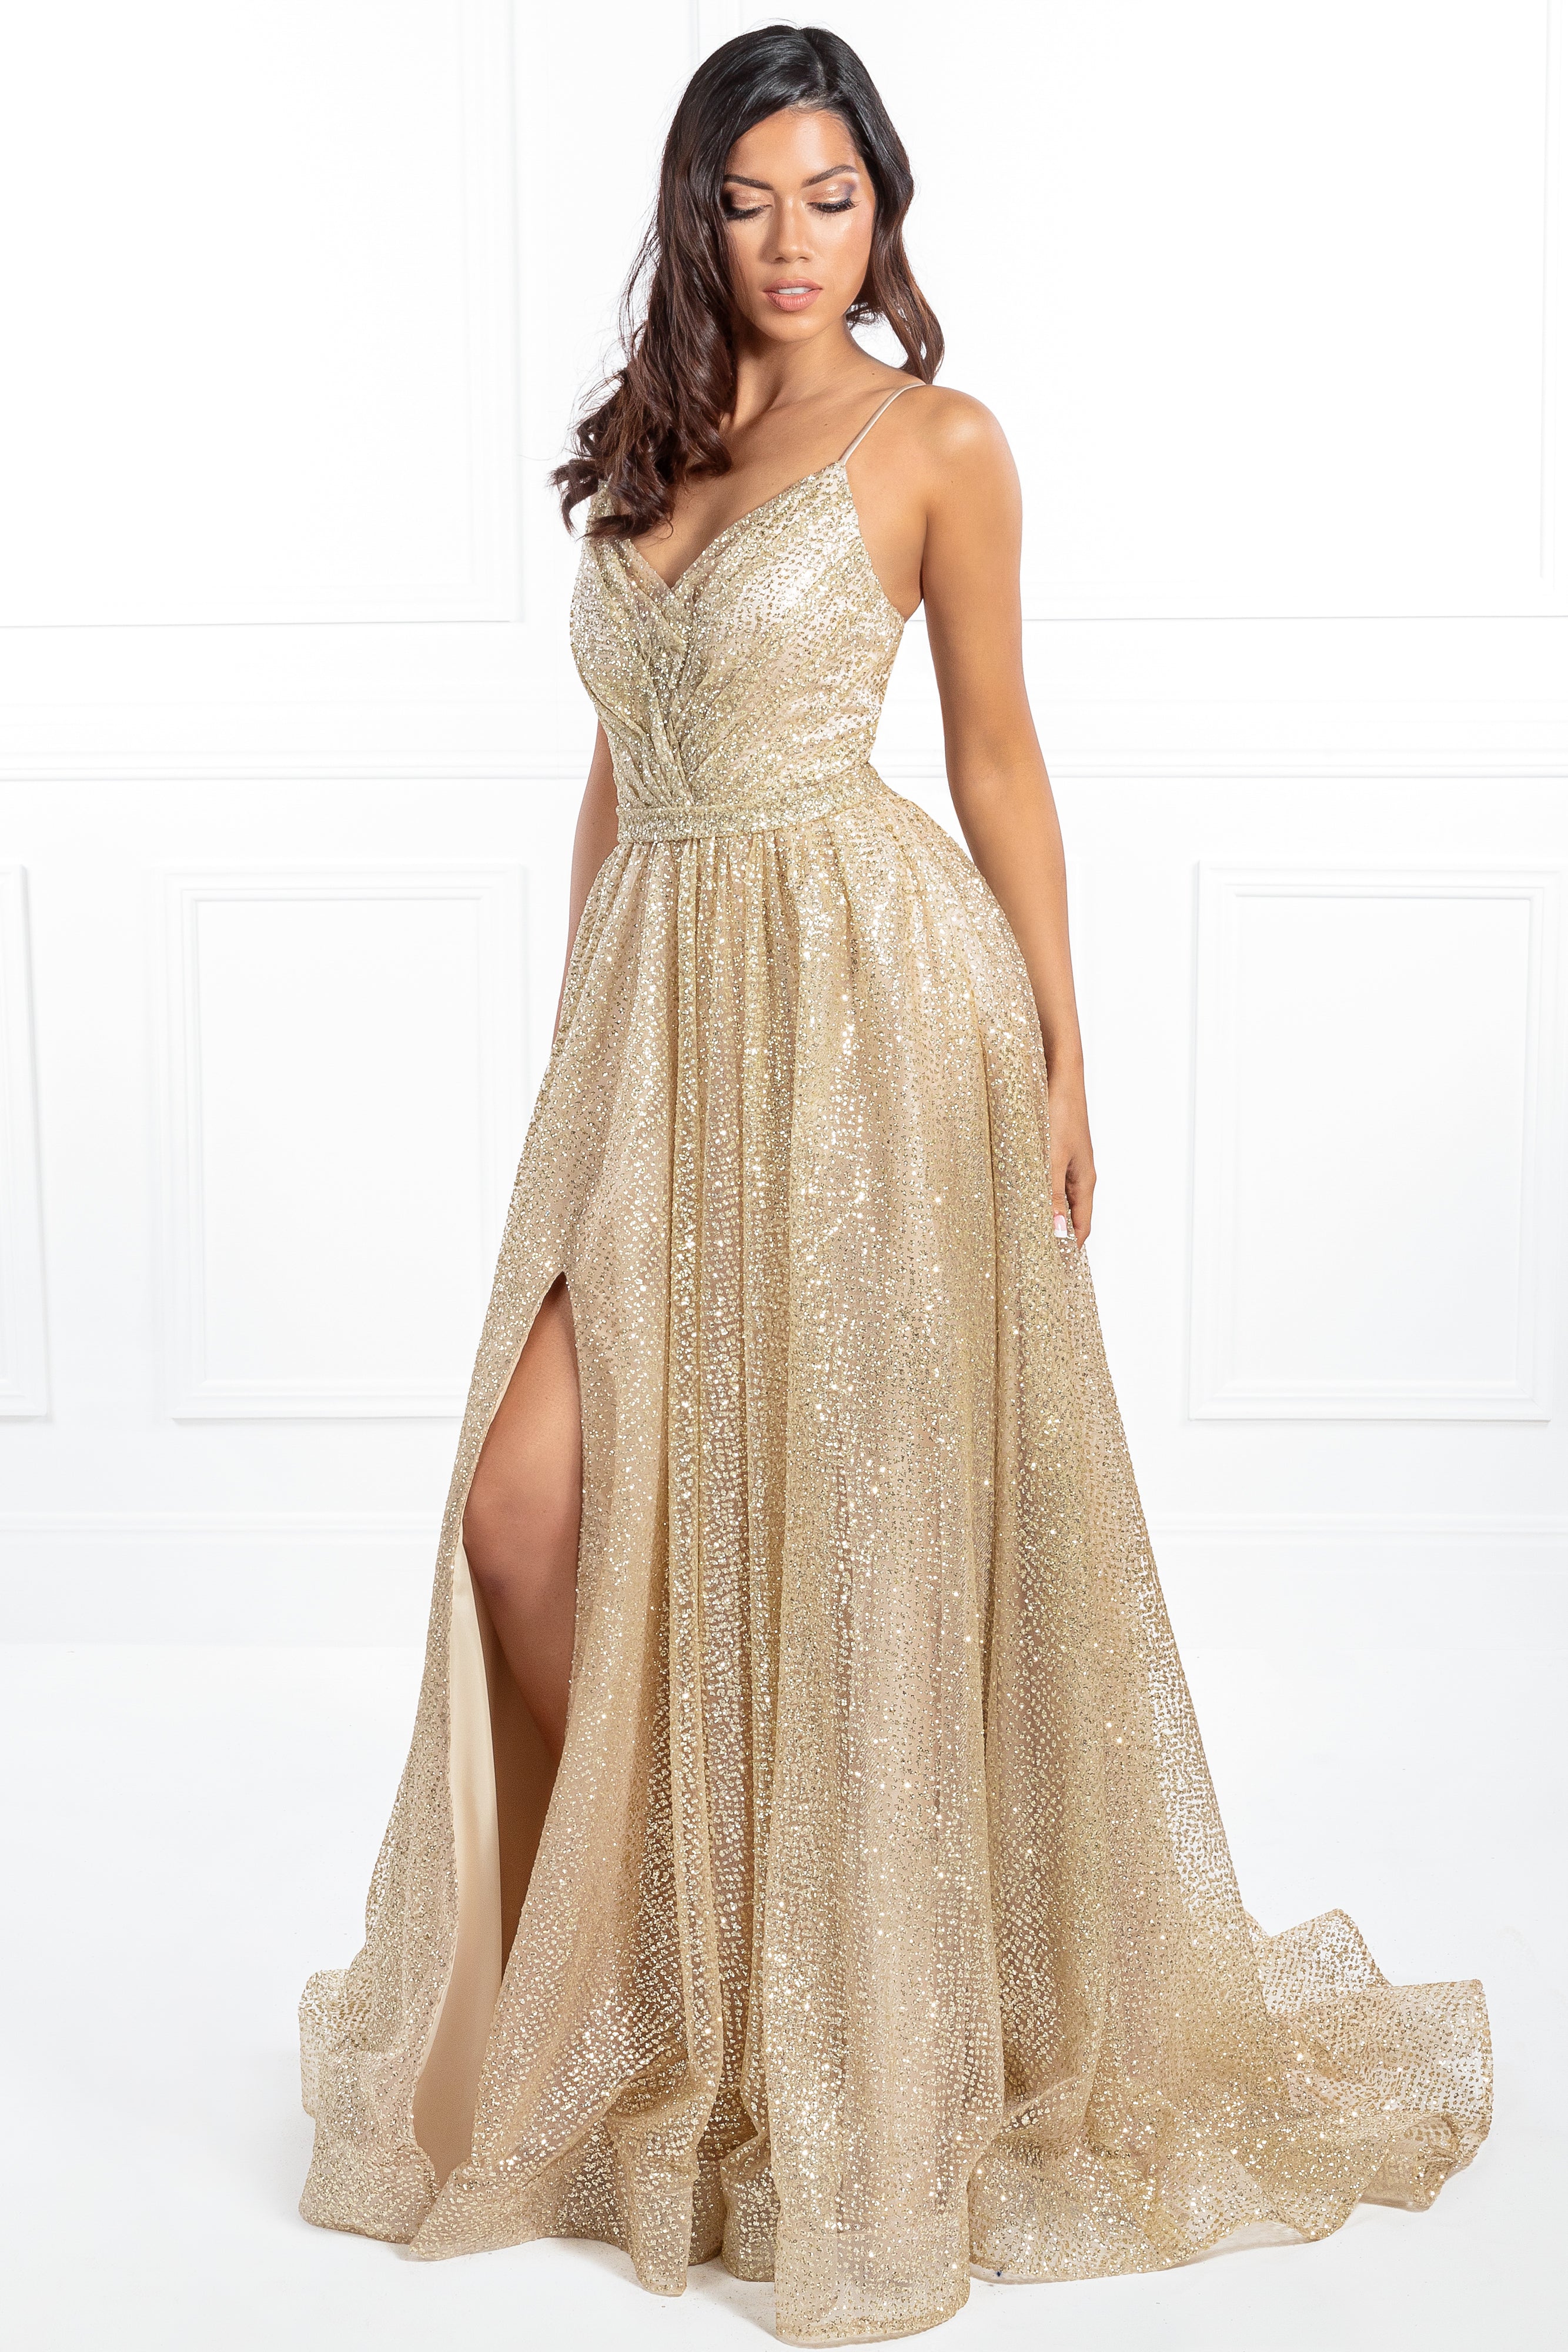 Honey Couture AVA Gold Glitter Sparkle Ball Gown Formal Dress